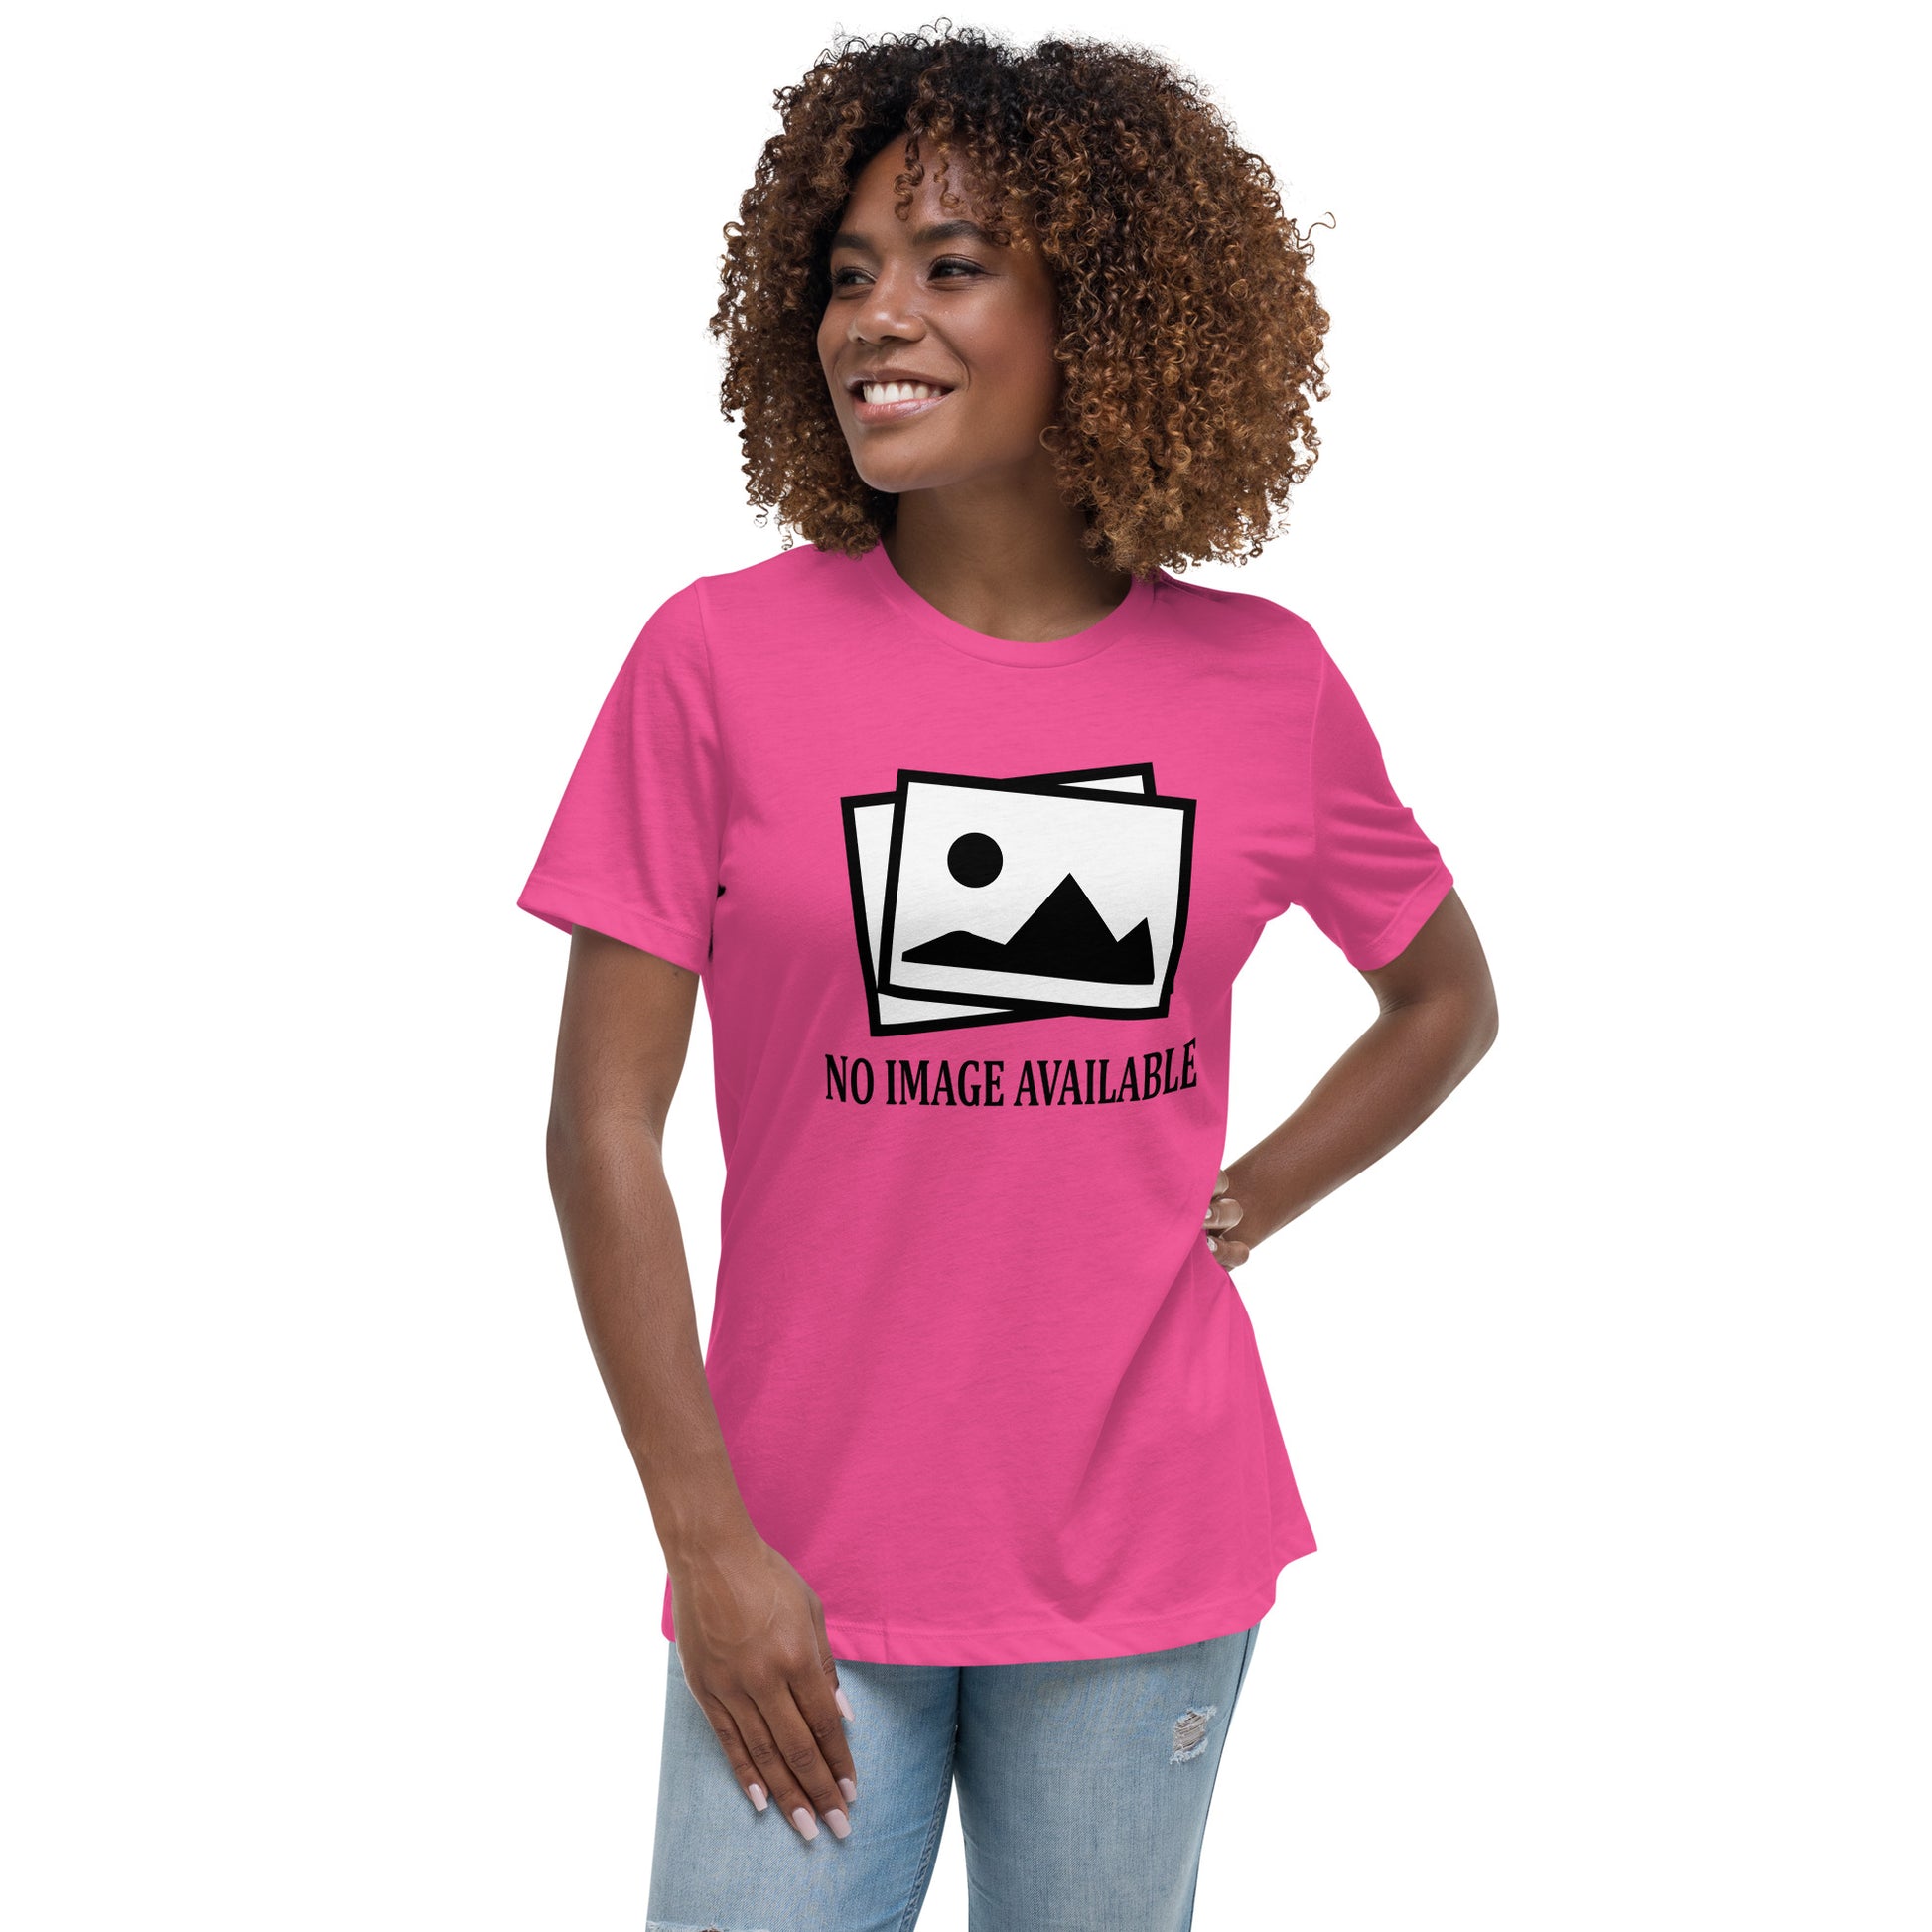 Women with berry t-shirt with image and text "no image available"